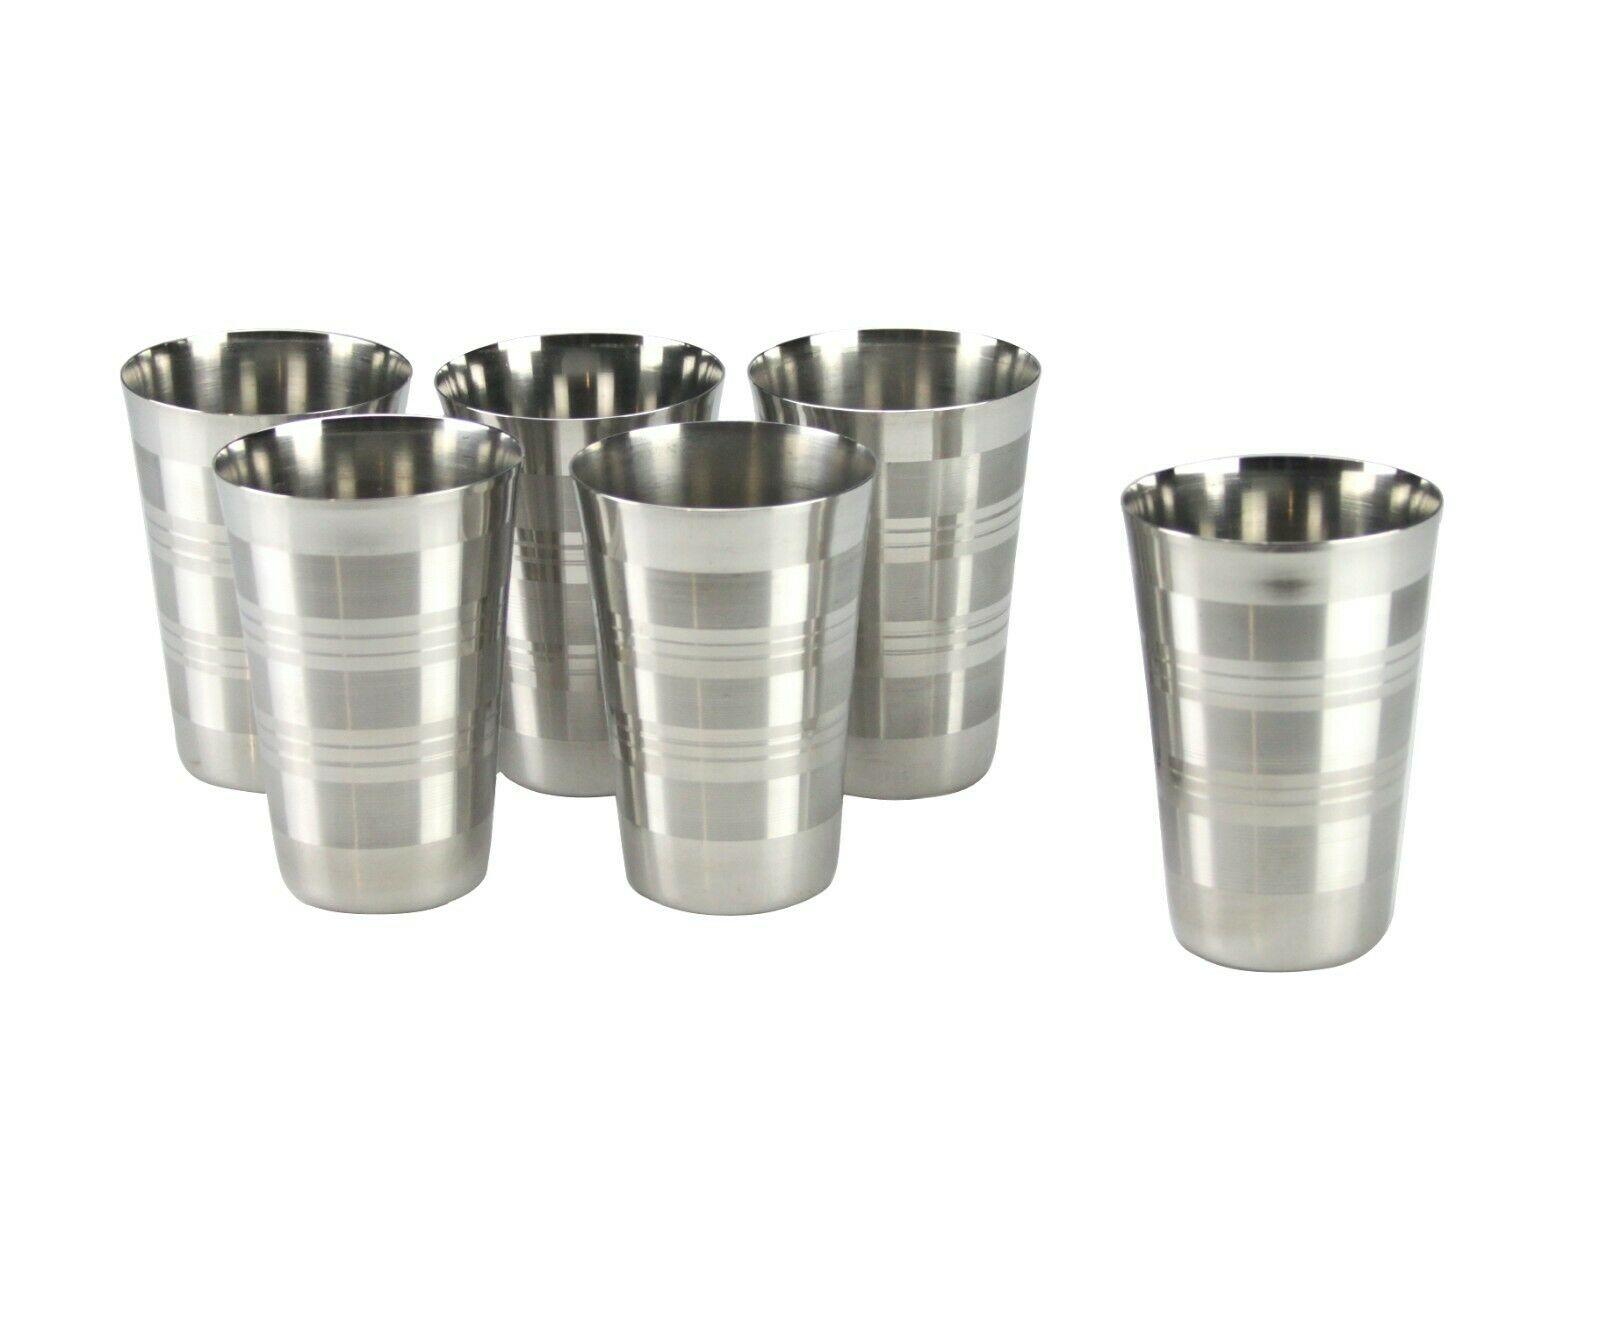 Stainless Steel Tea Coffee Water Cup Mug Drinking Set with Metal Stand Rack 